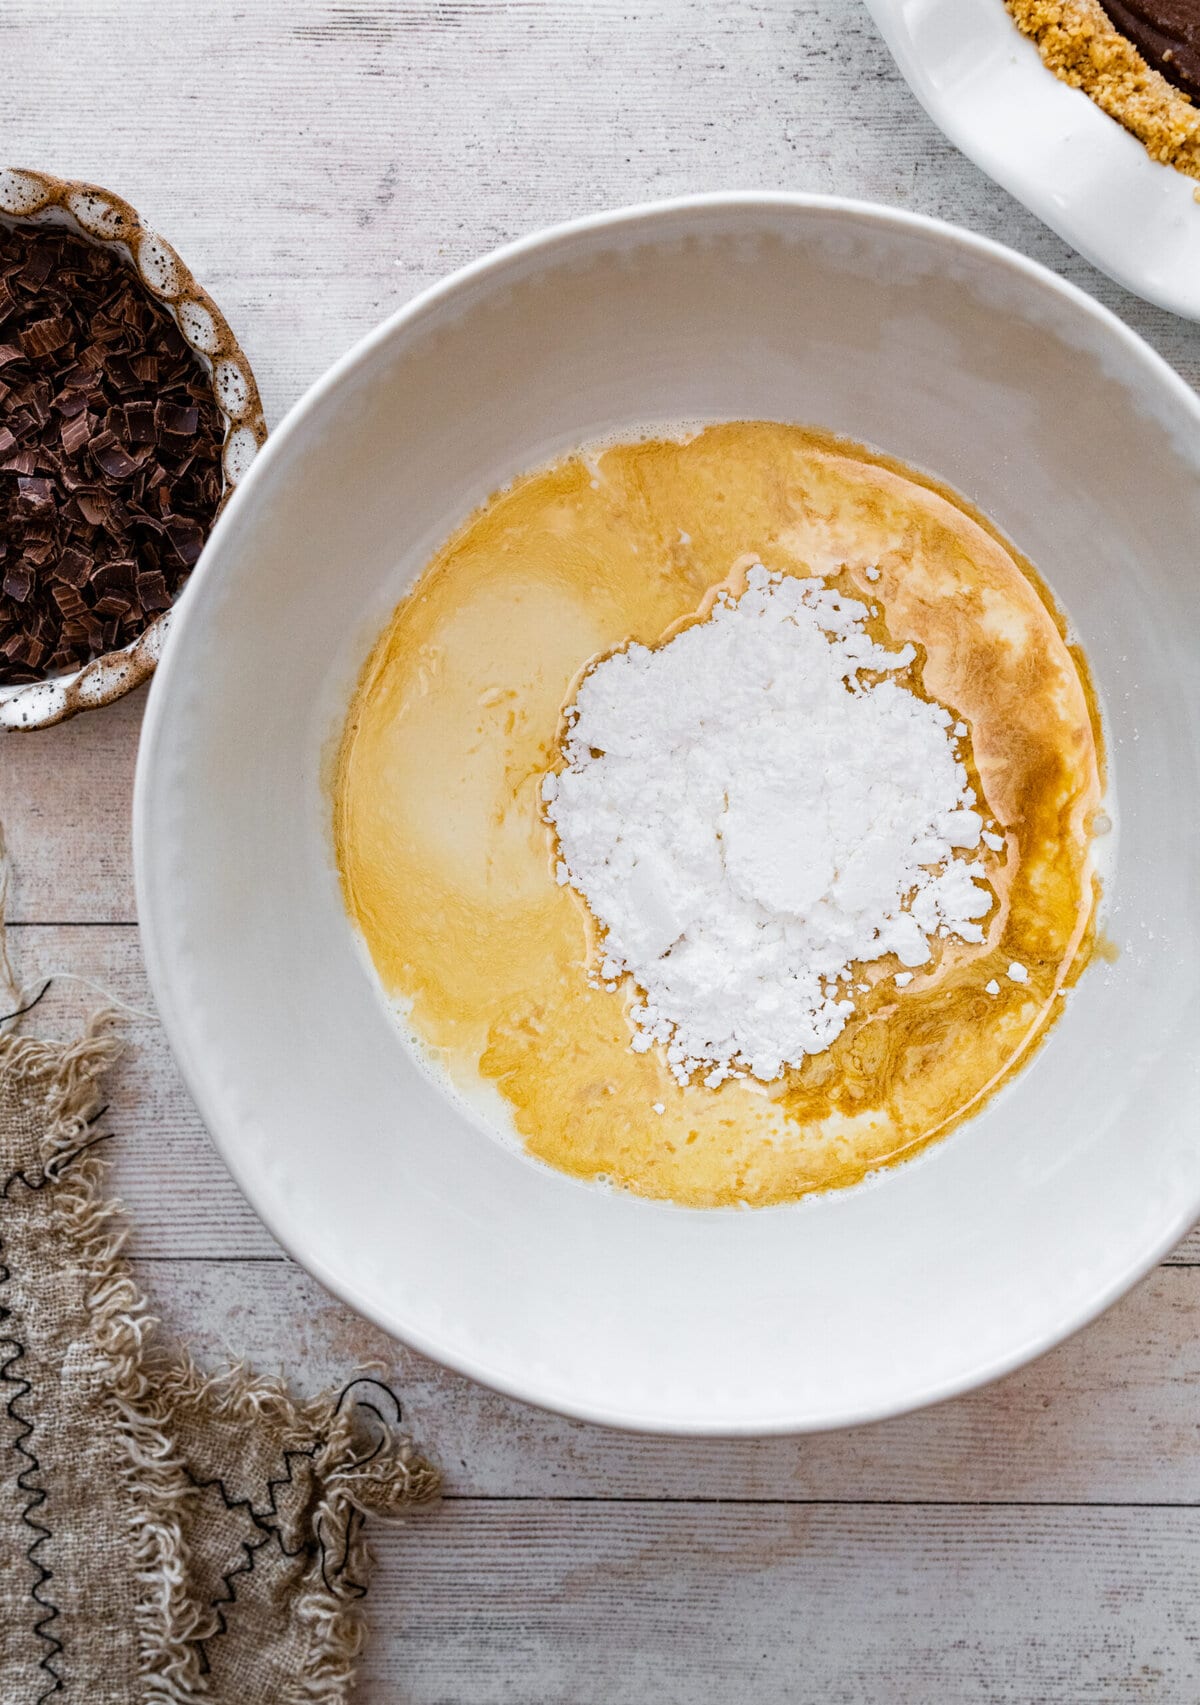 How to make homemade chocolate pudding pie step-by-step: tempering the egg yolks.